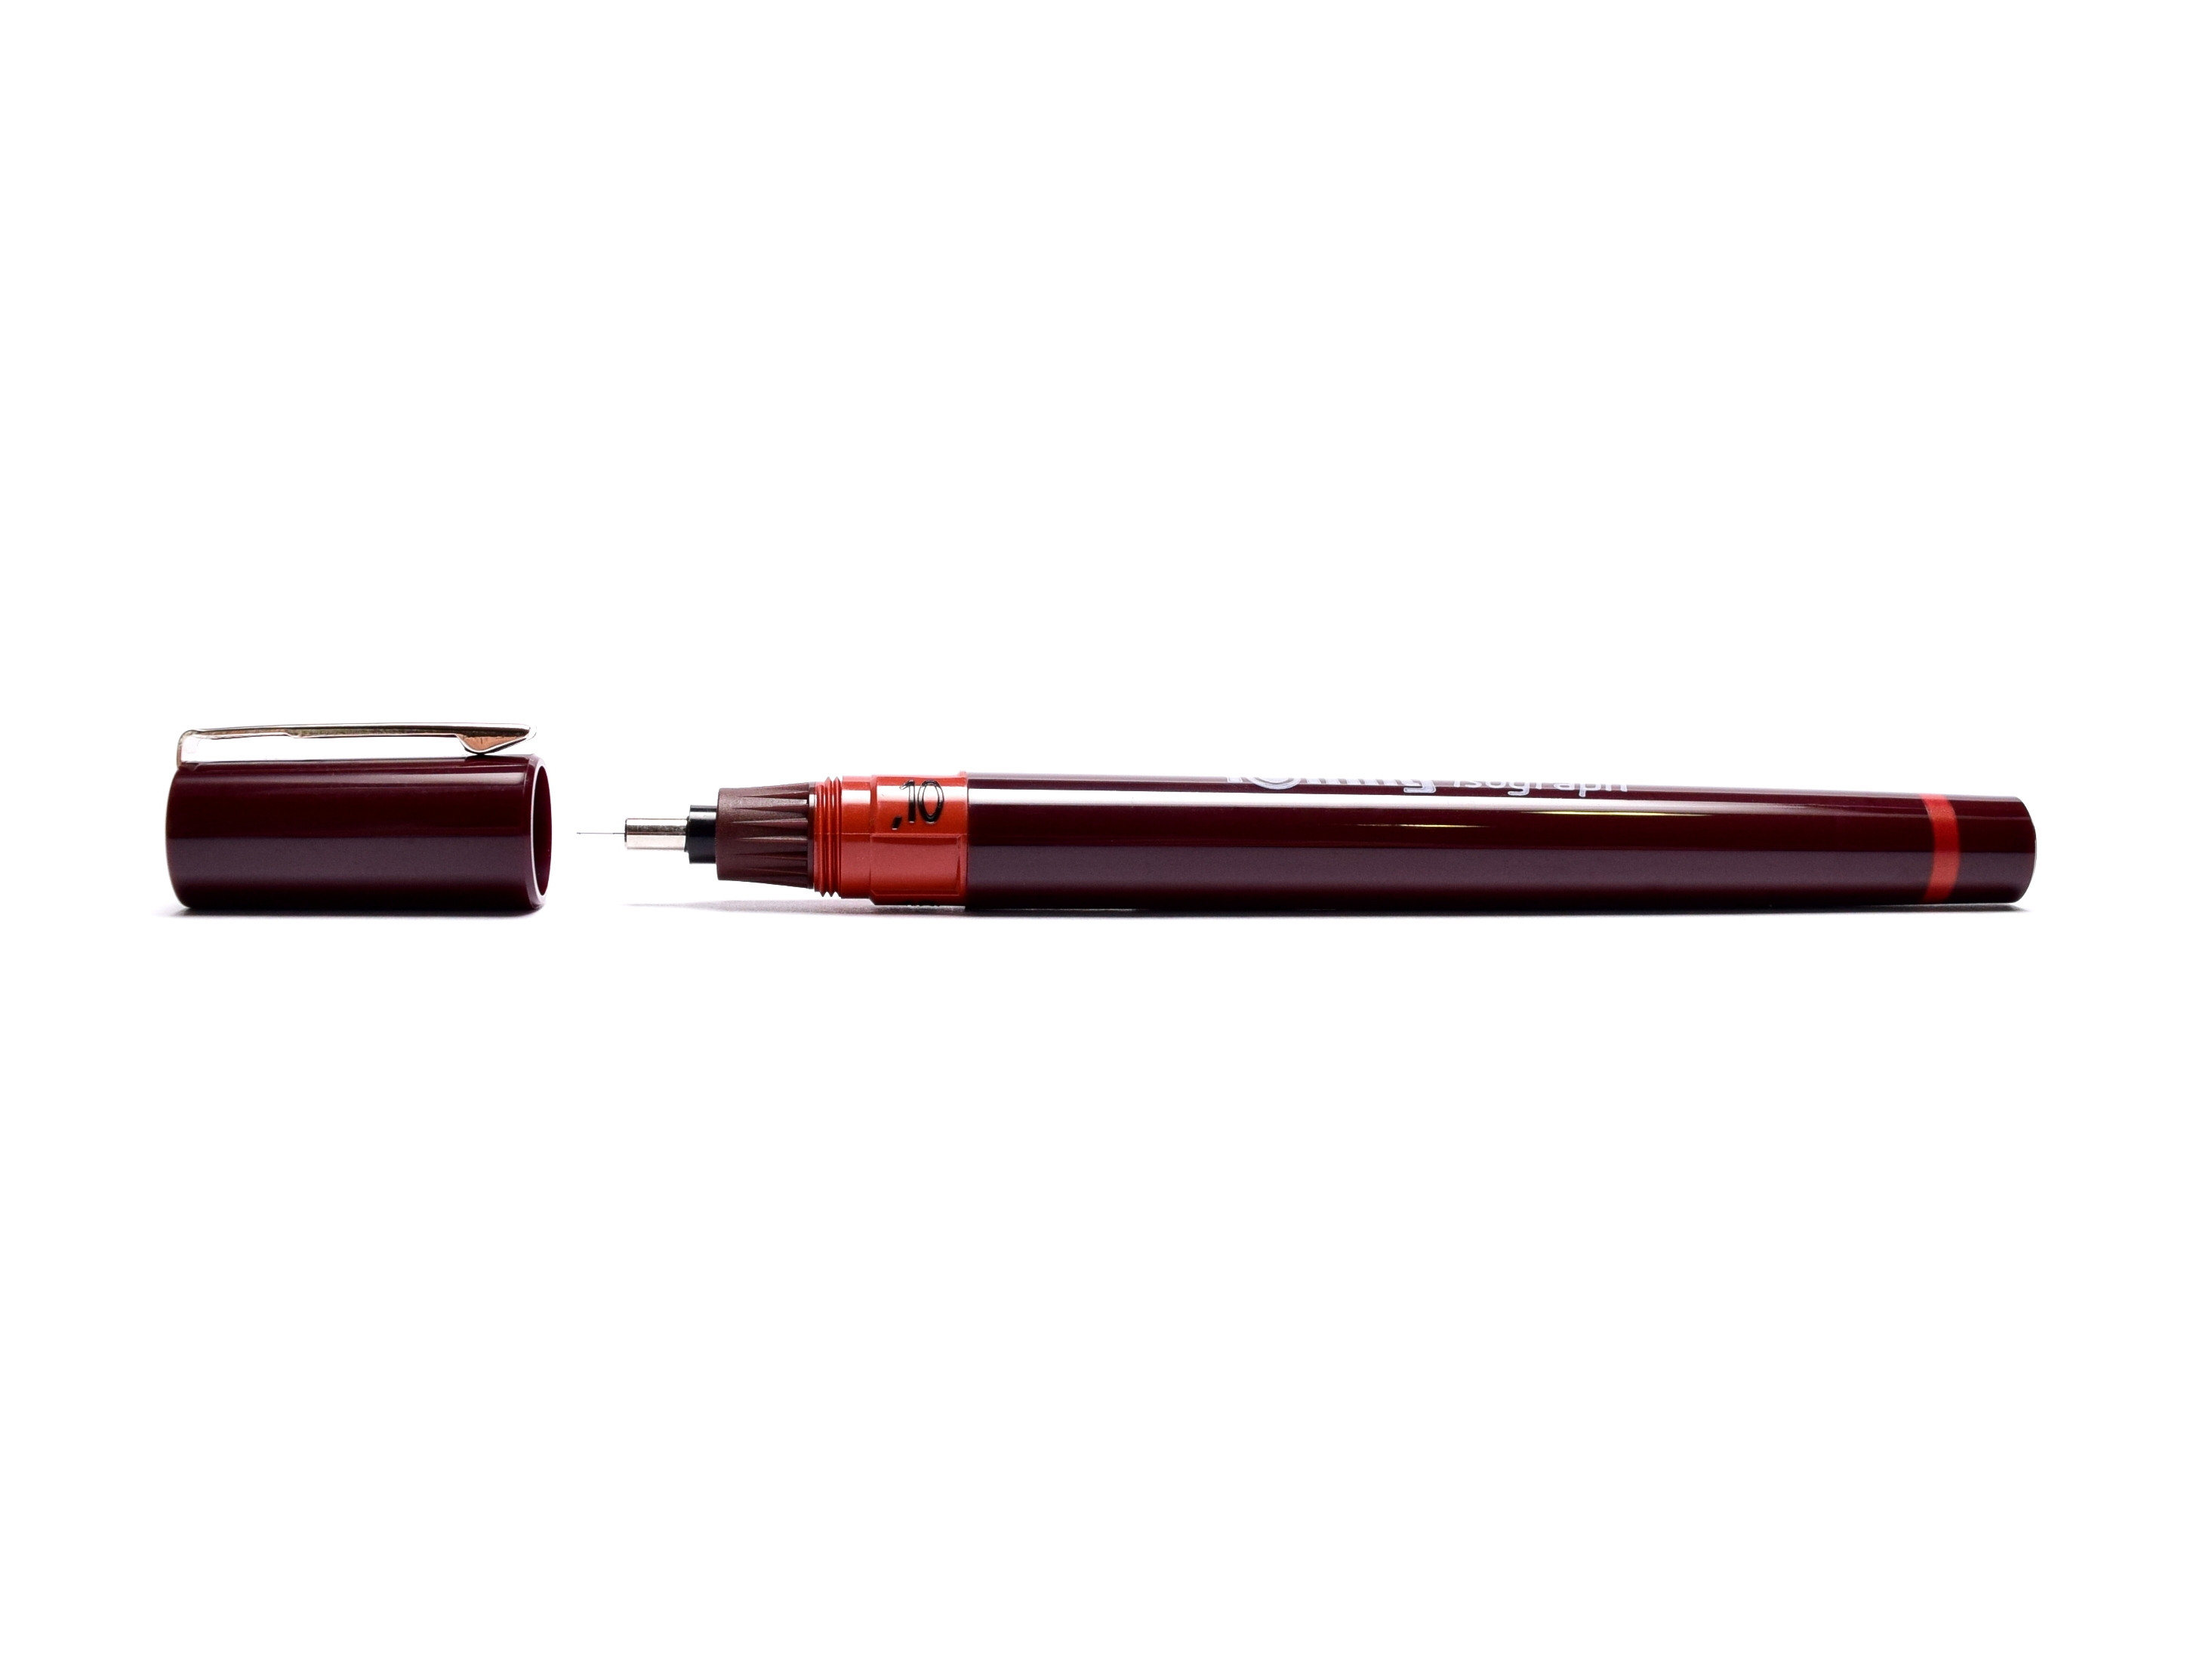 Rotring Rapidograph pen review